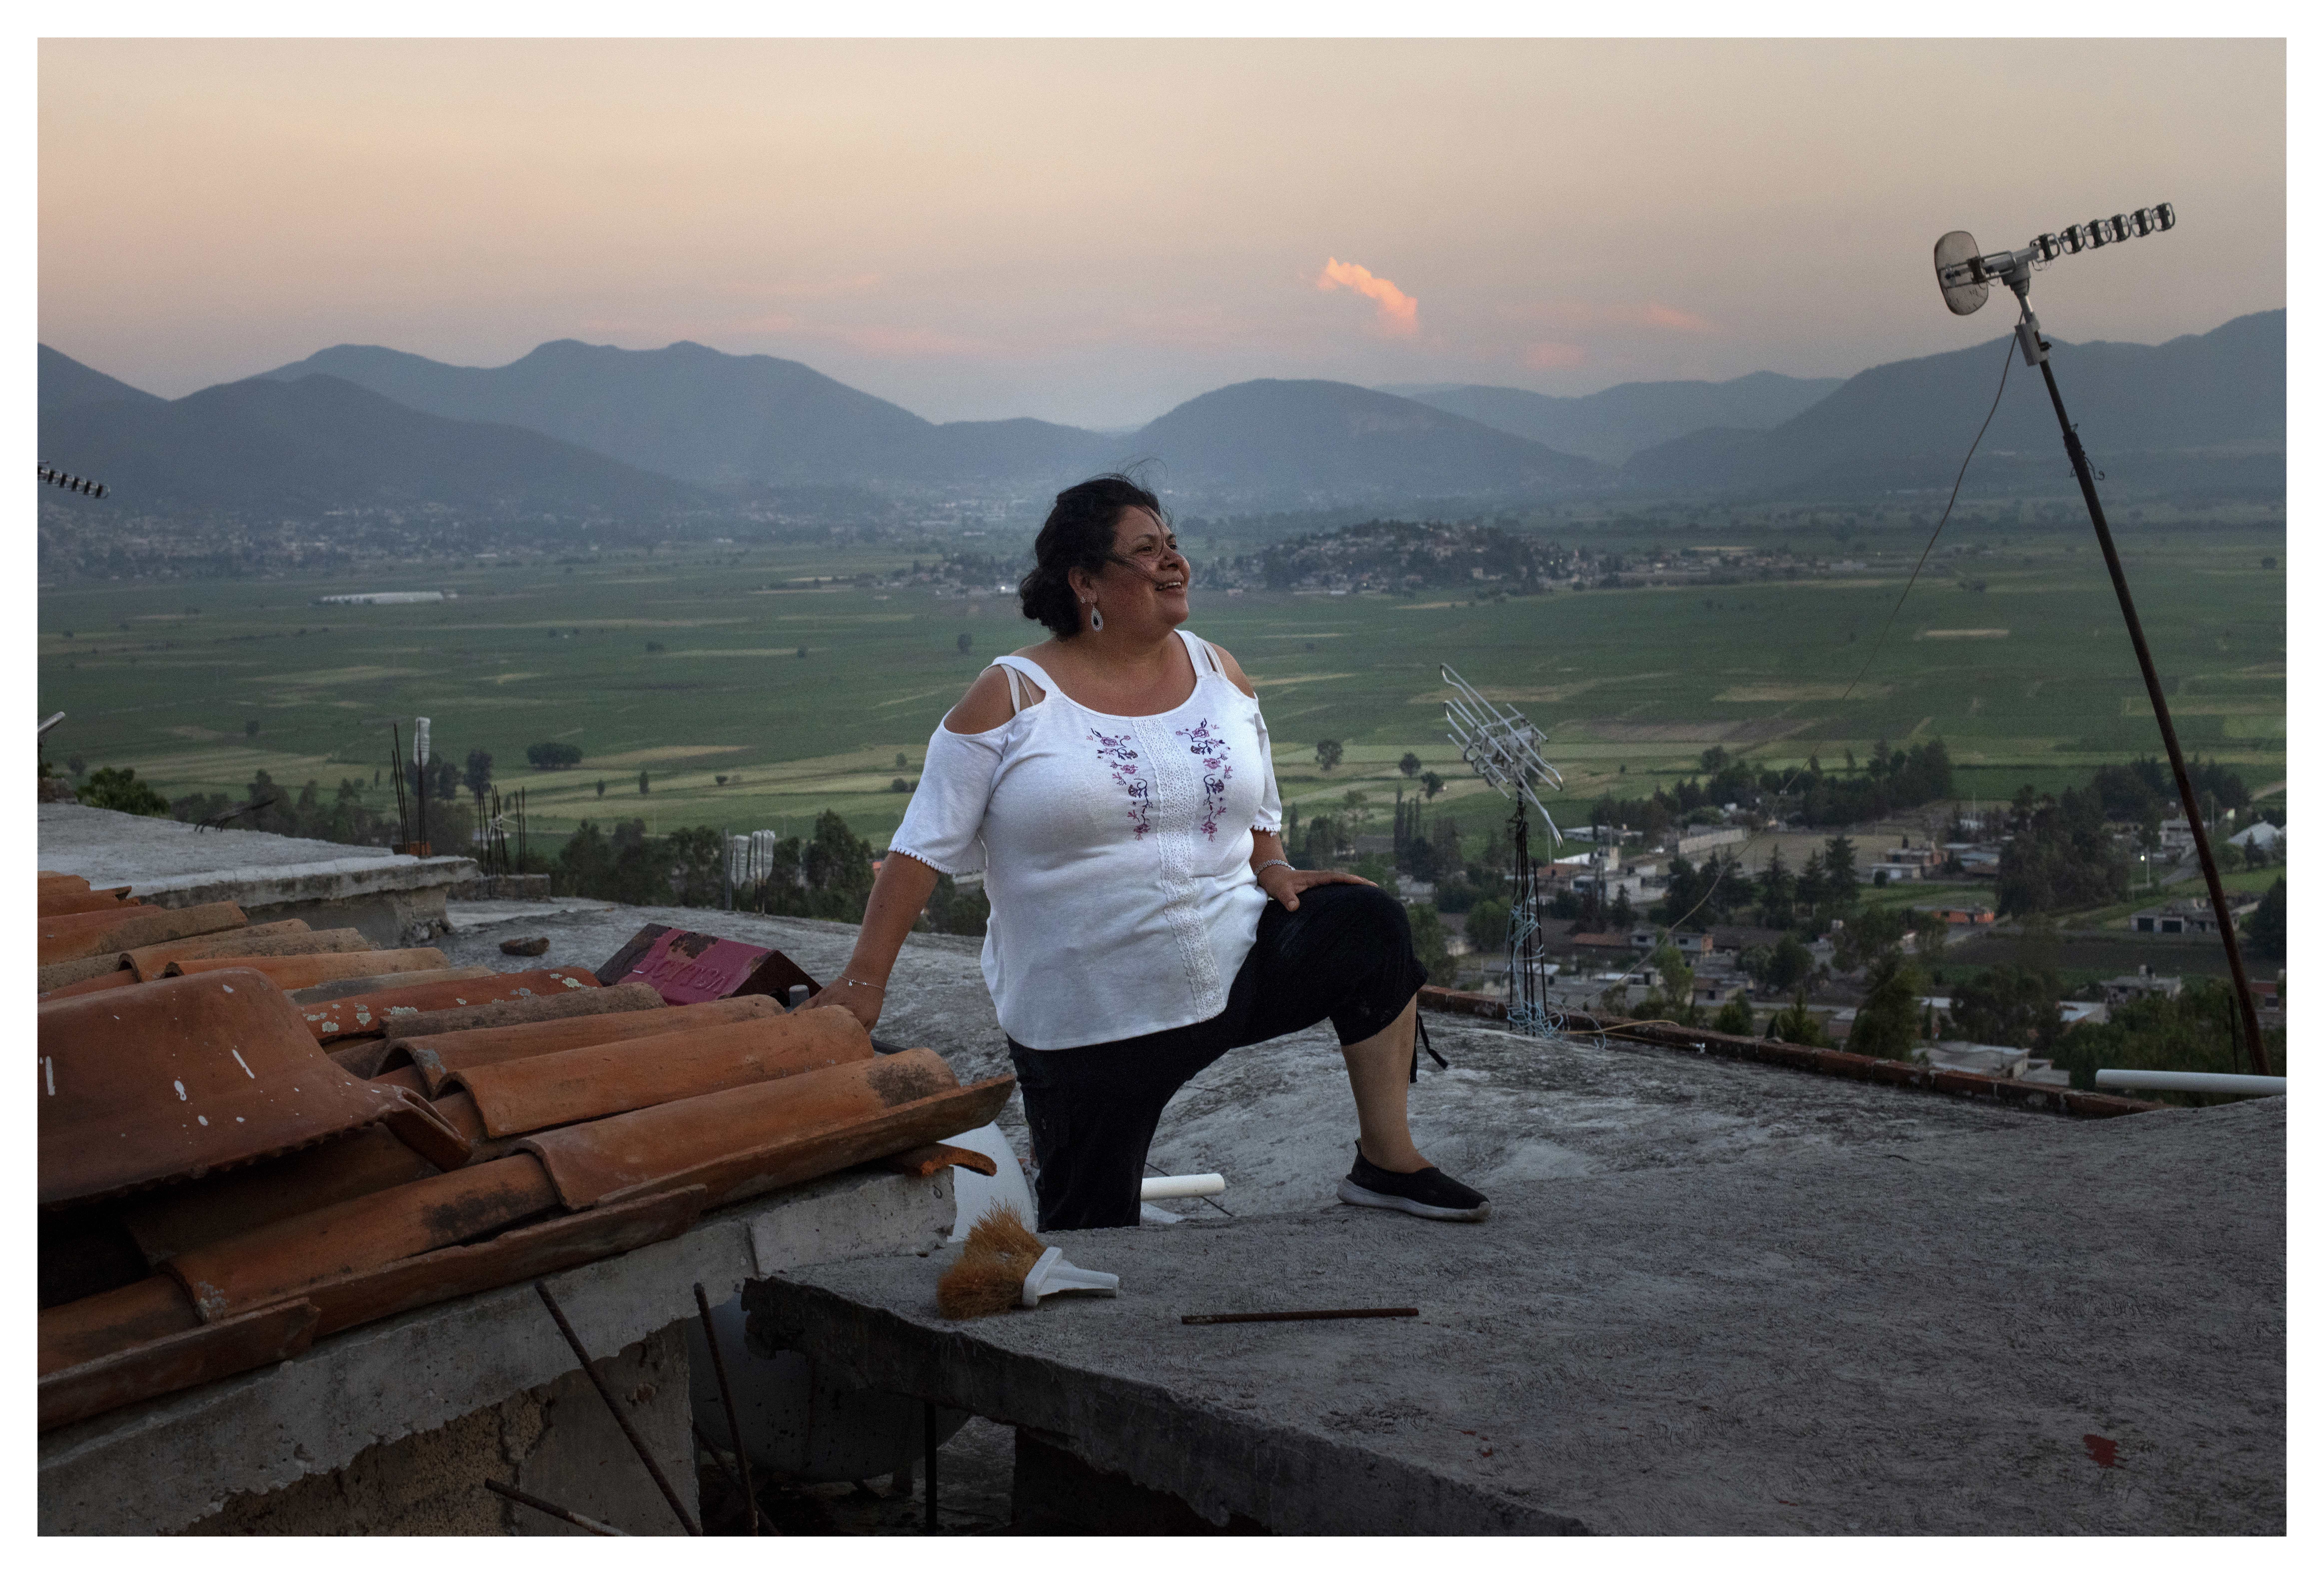 Lourdes Salazar Bautista looks up and smiles as she stands on the roof on Friday, June 1, 2018 at the house she grew up in, in San Nicols, Mexico. When Salazar Bautista was growing up, she used to think the mountains in the background were "the end of the world." Photo by Rachel Woolf for Deported.